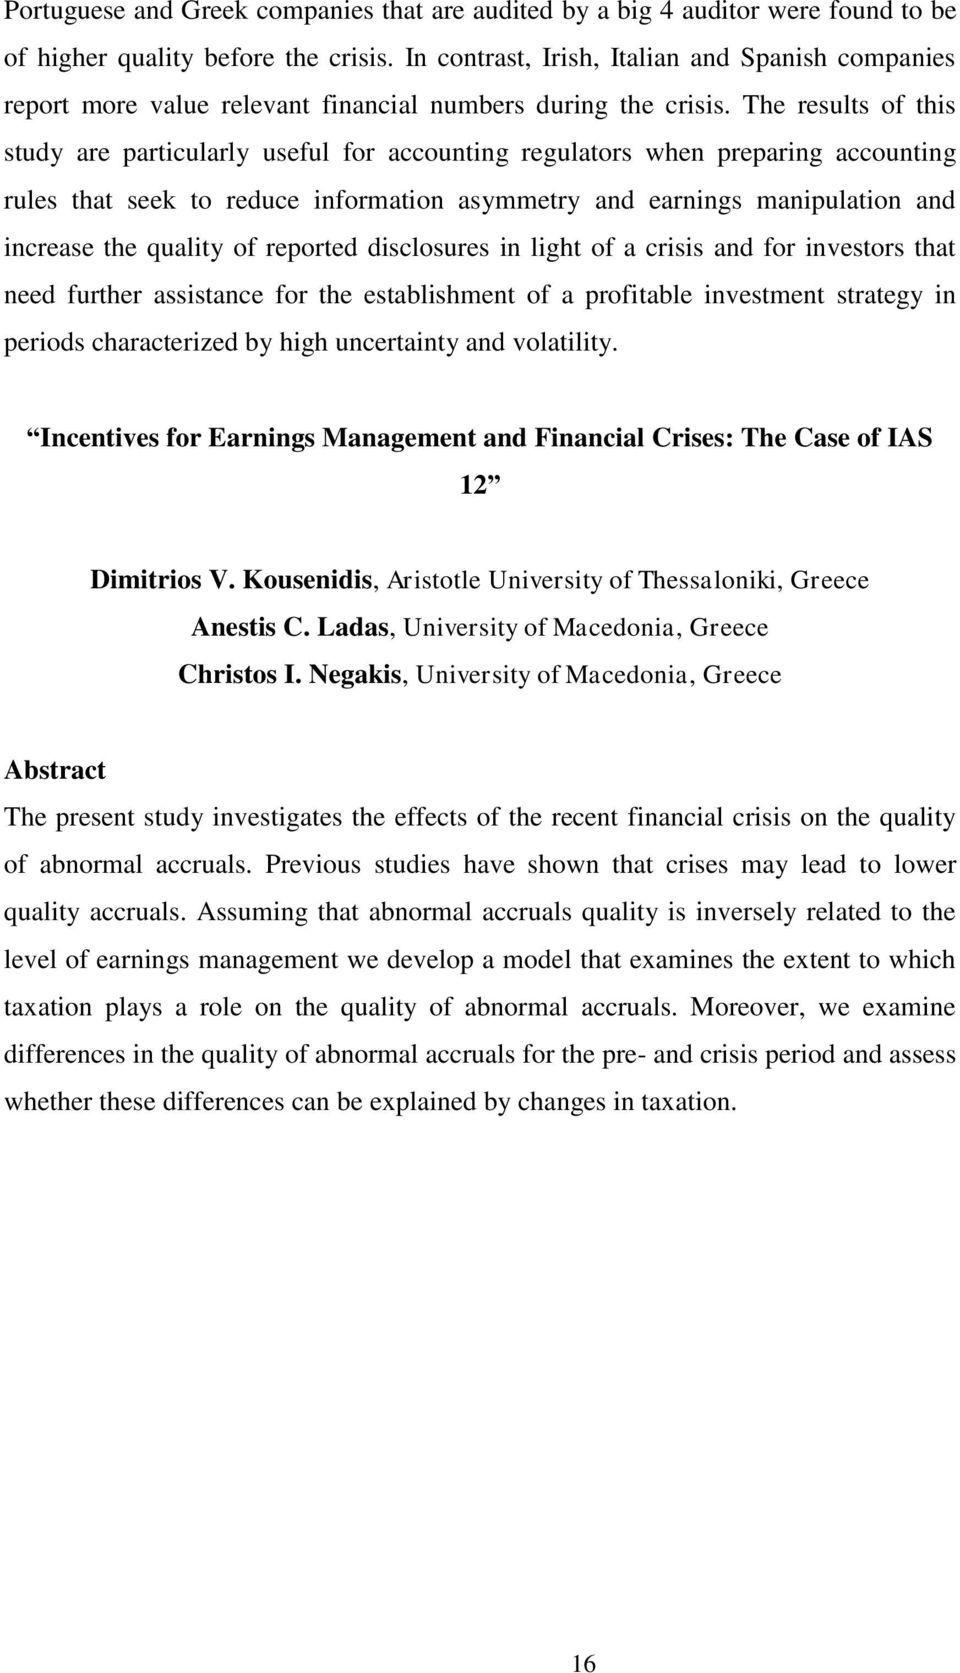 The results of this study are particularly useful for accounting regulators when preparing accounting rules that seek to reduce information asymmetry and earnings manipulation and increase the